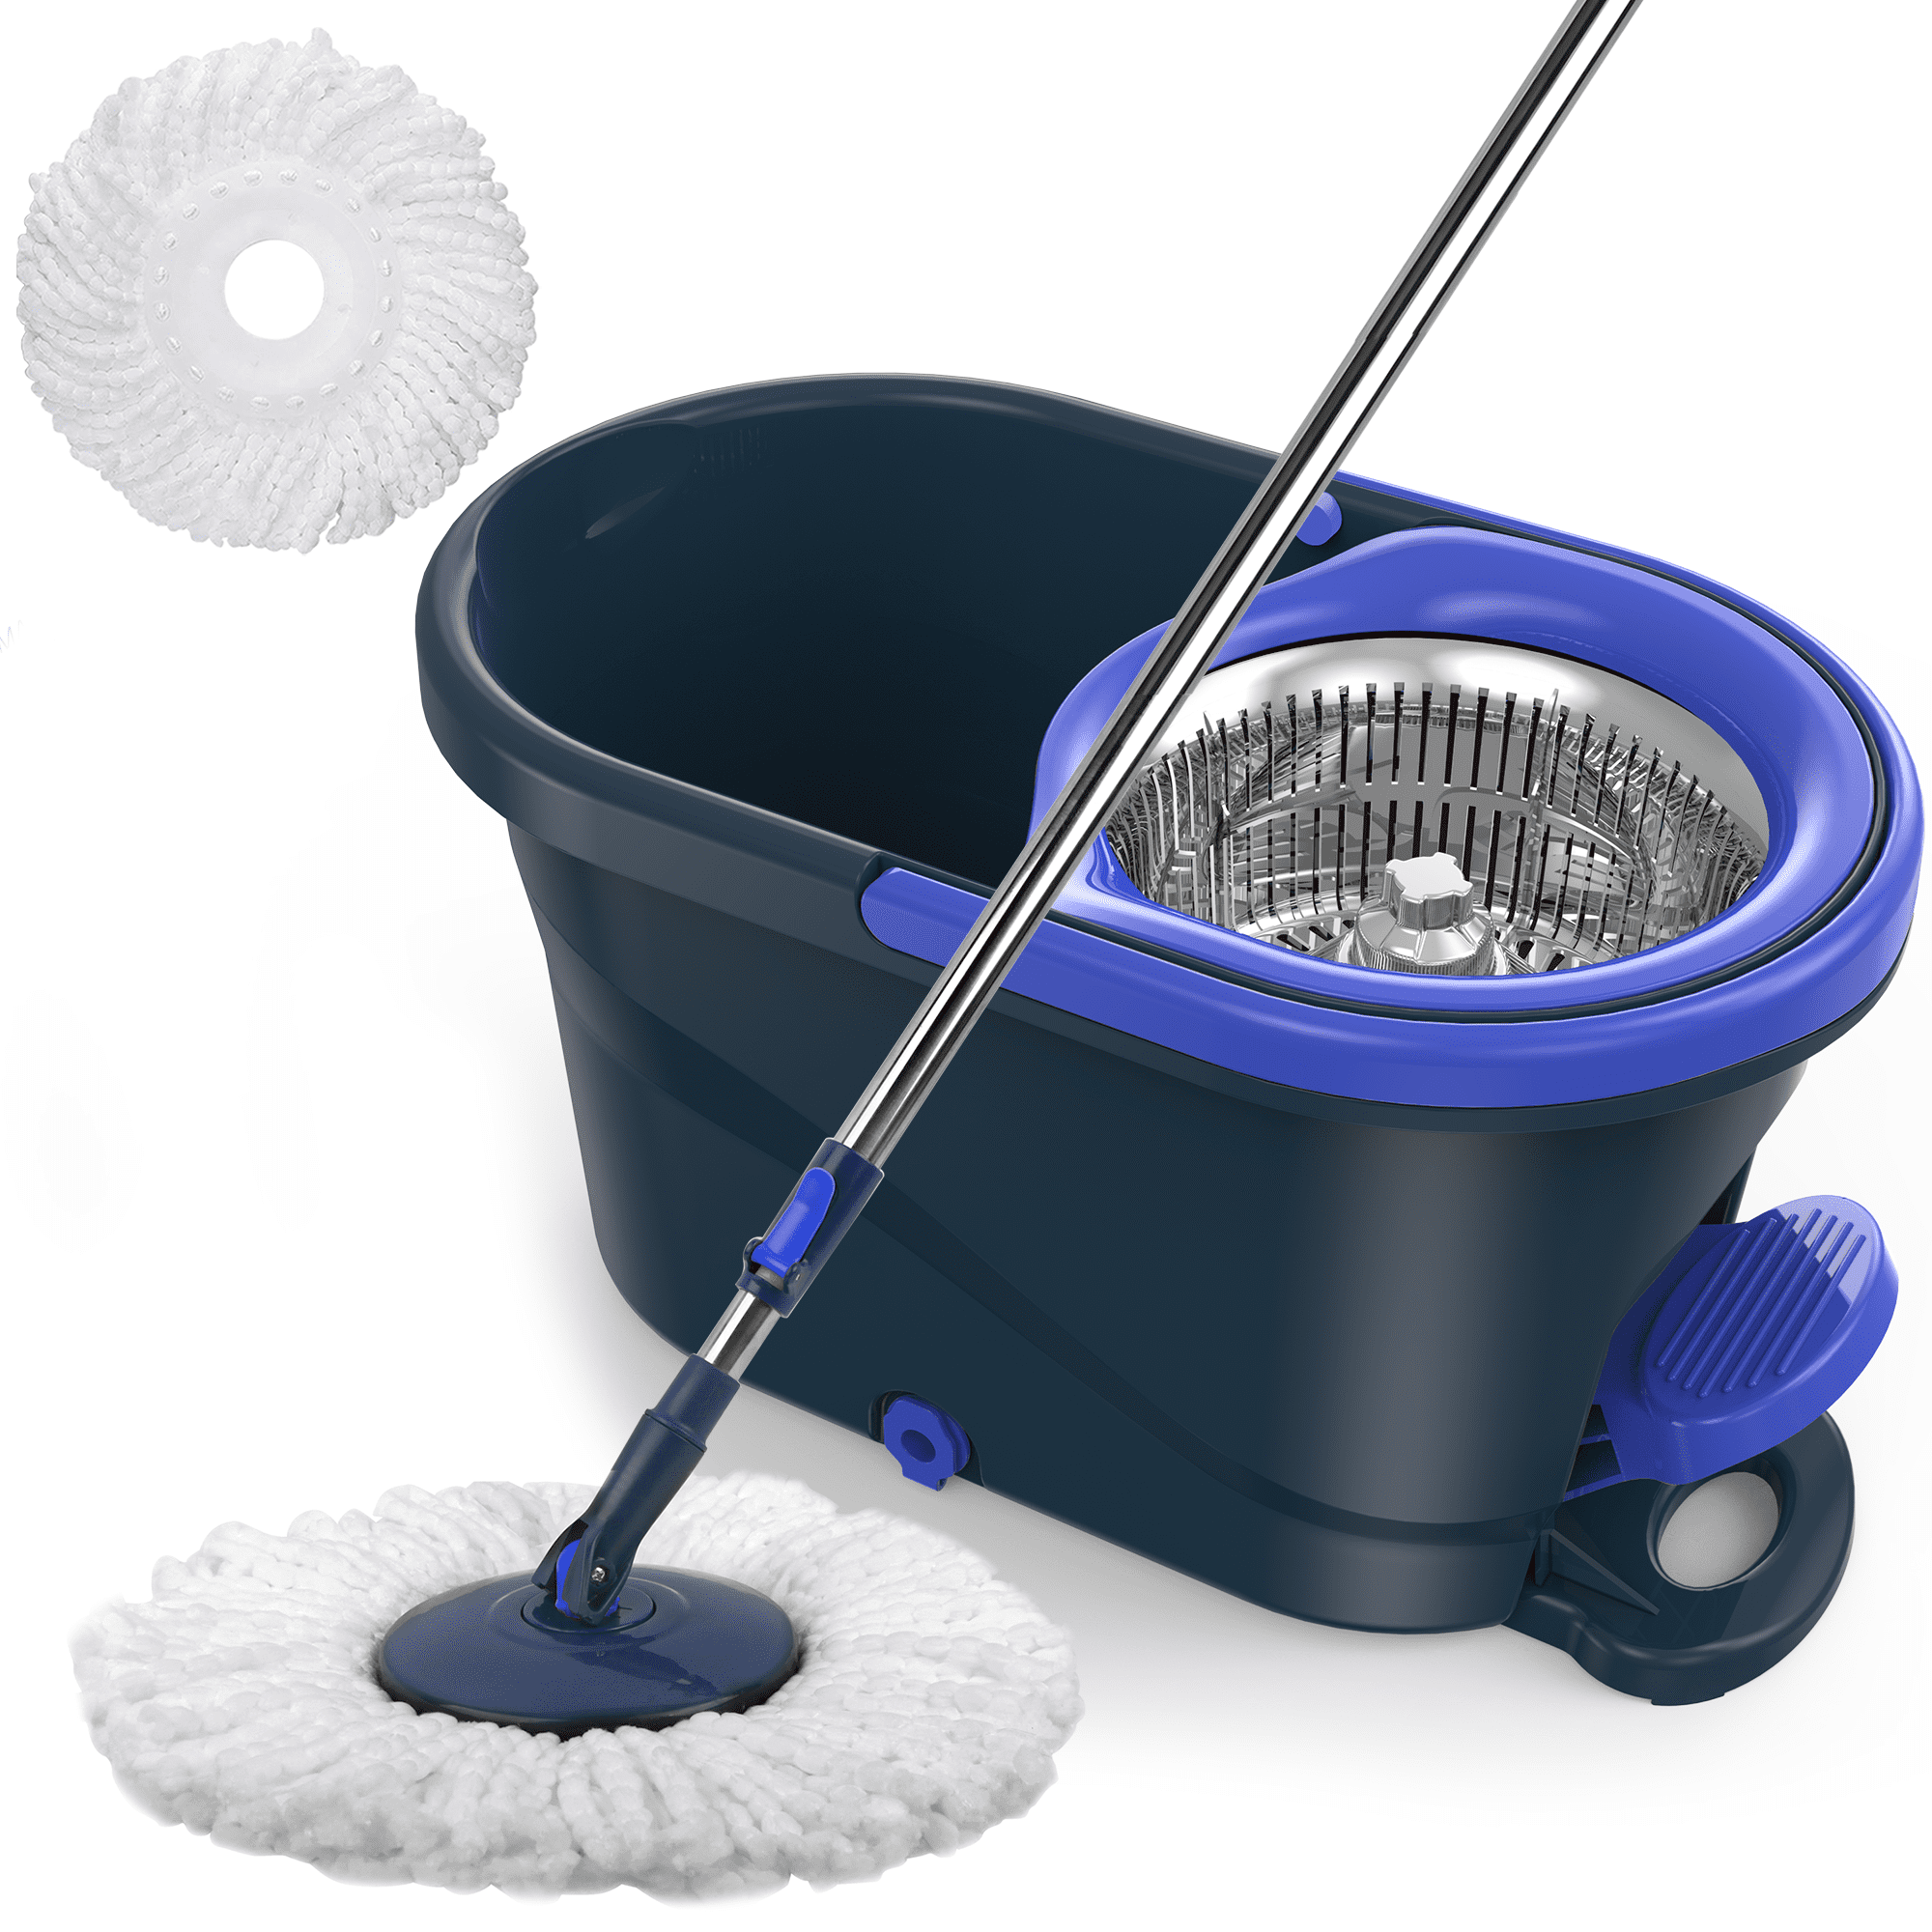 SUGARDAY Spin Mop and Bucket with Wringer Set for Floors Cleaning Heavy  duty System, Green 